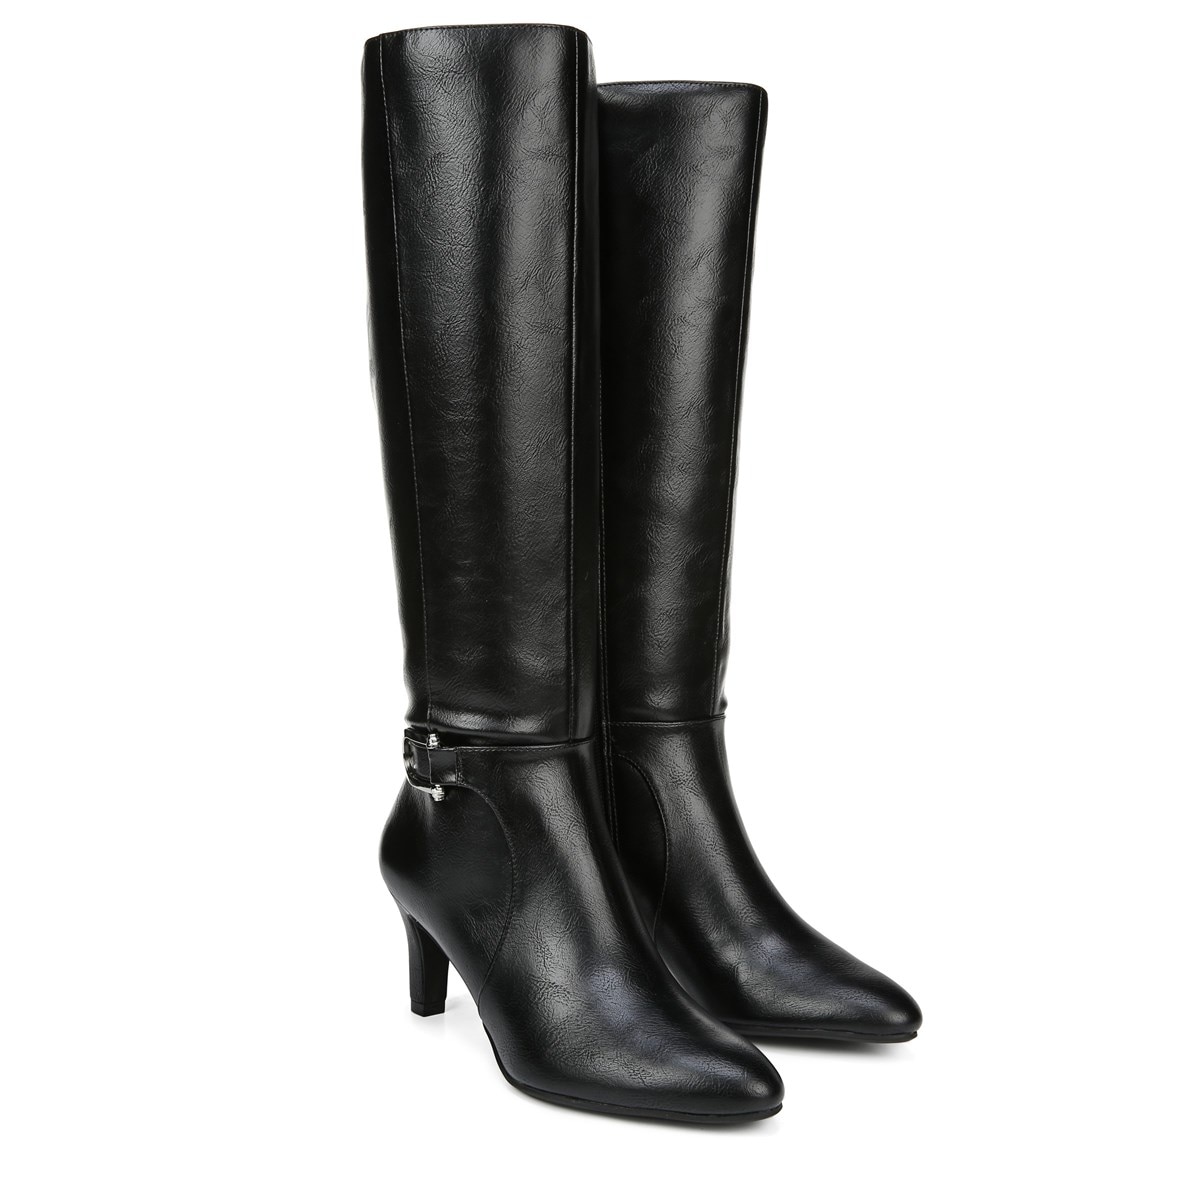 wide calf waterproof leather boots